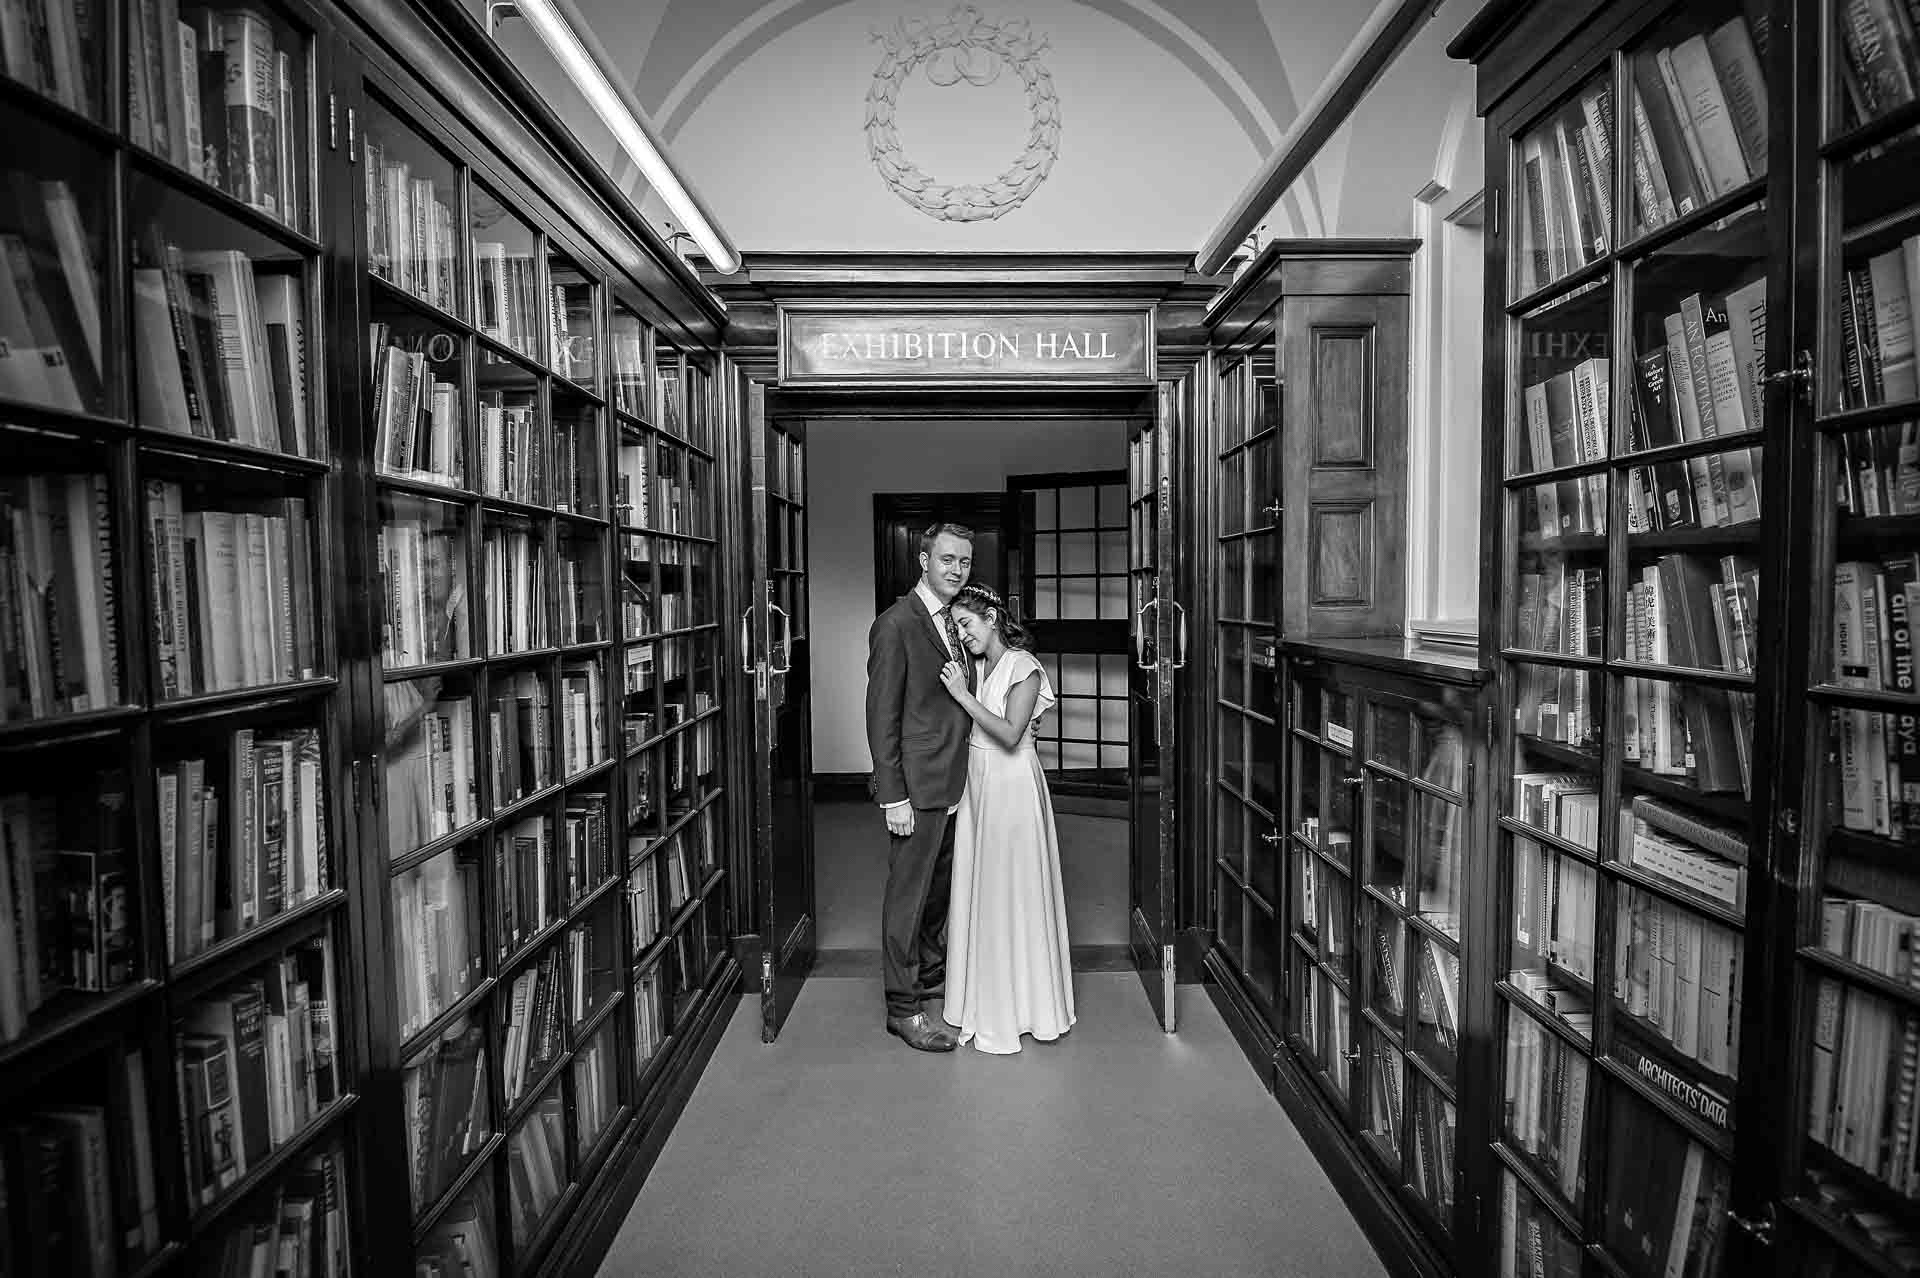 Bride rests head on groom's chest at end of the Fine Art Collection Corridor in Fulham Library